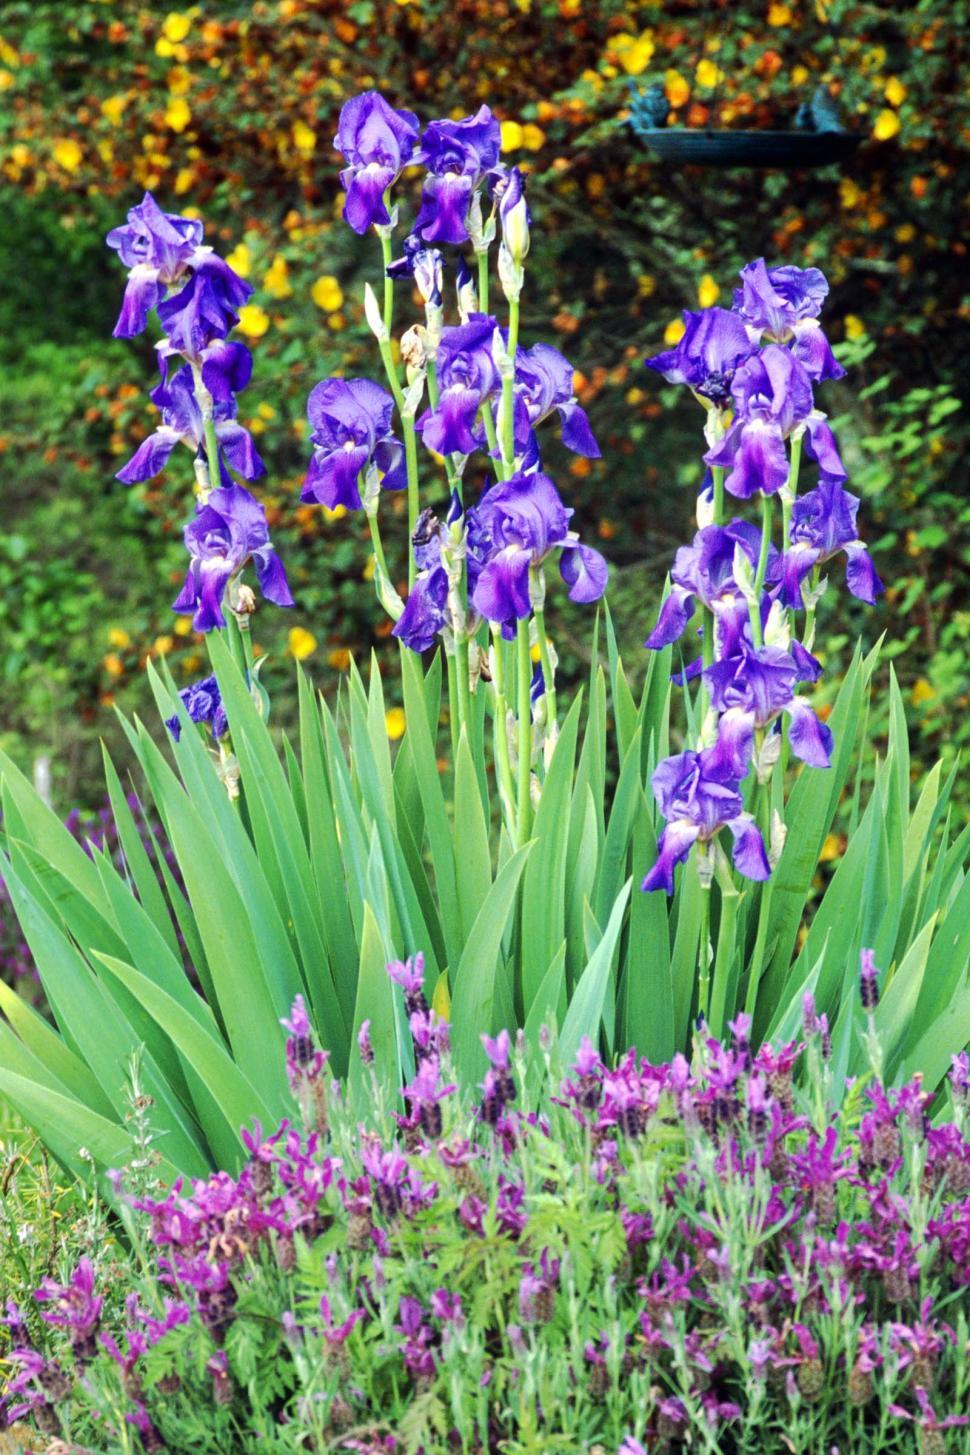 Free Image of Cluster of Purple Flowers in a Garden 